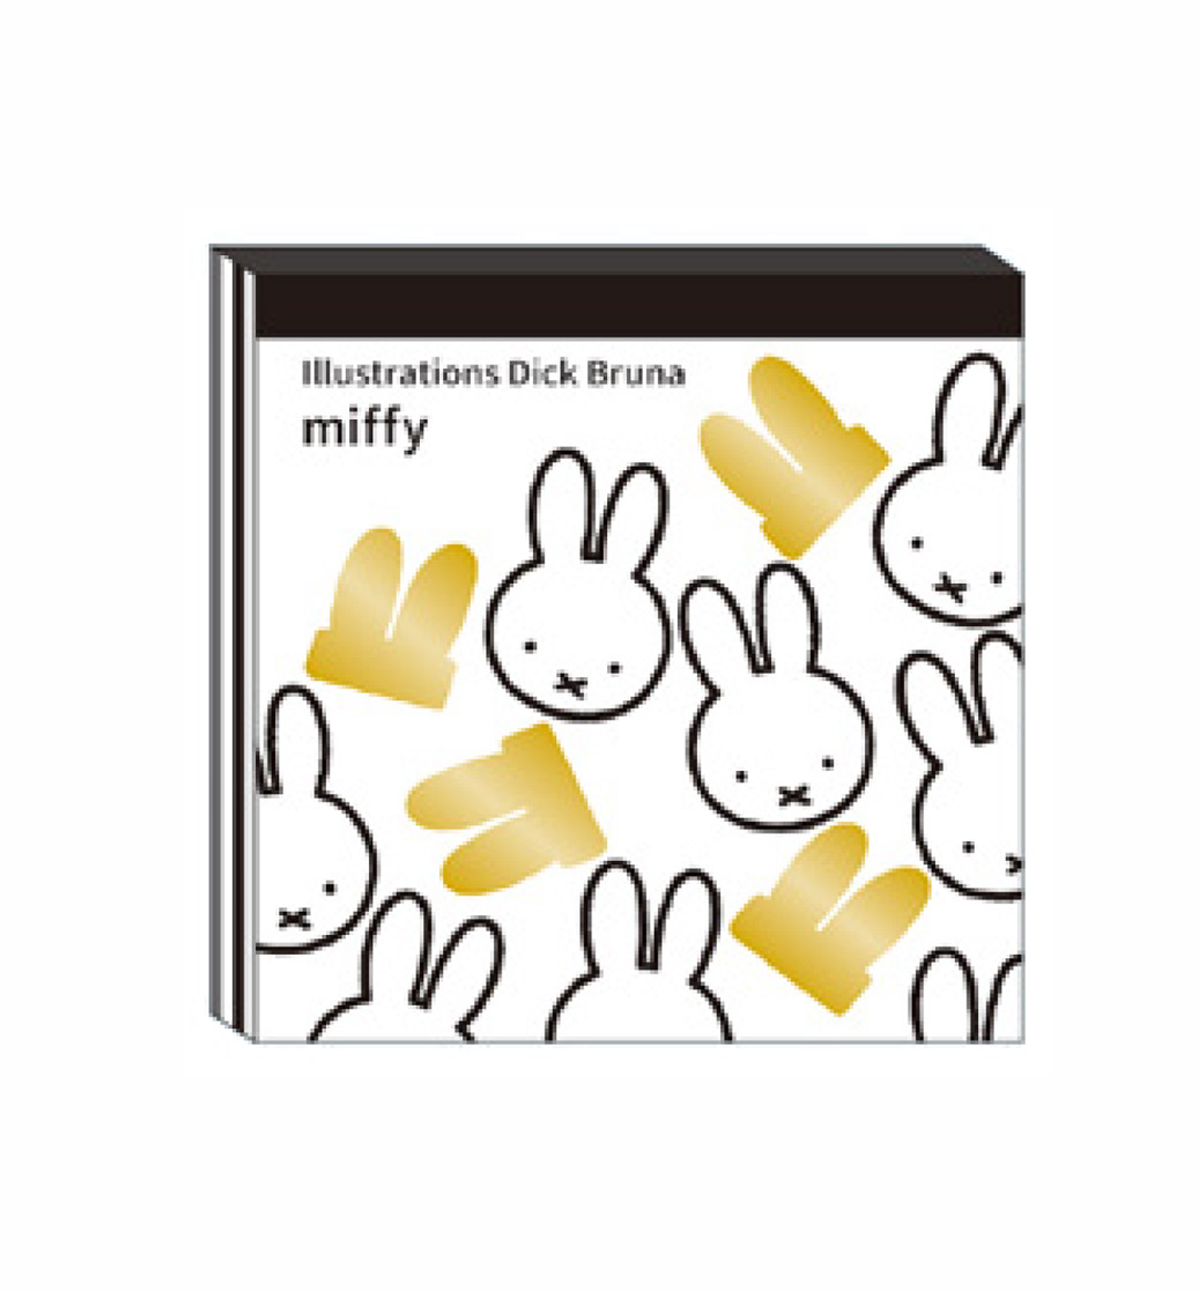 Alpha Collection - Miffy Stickers Set - Miffy at School